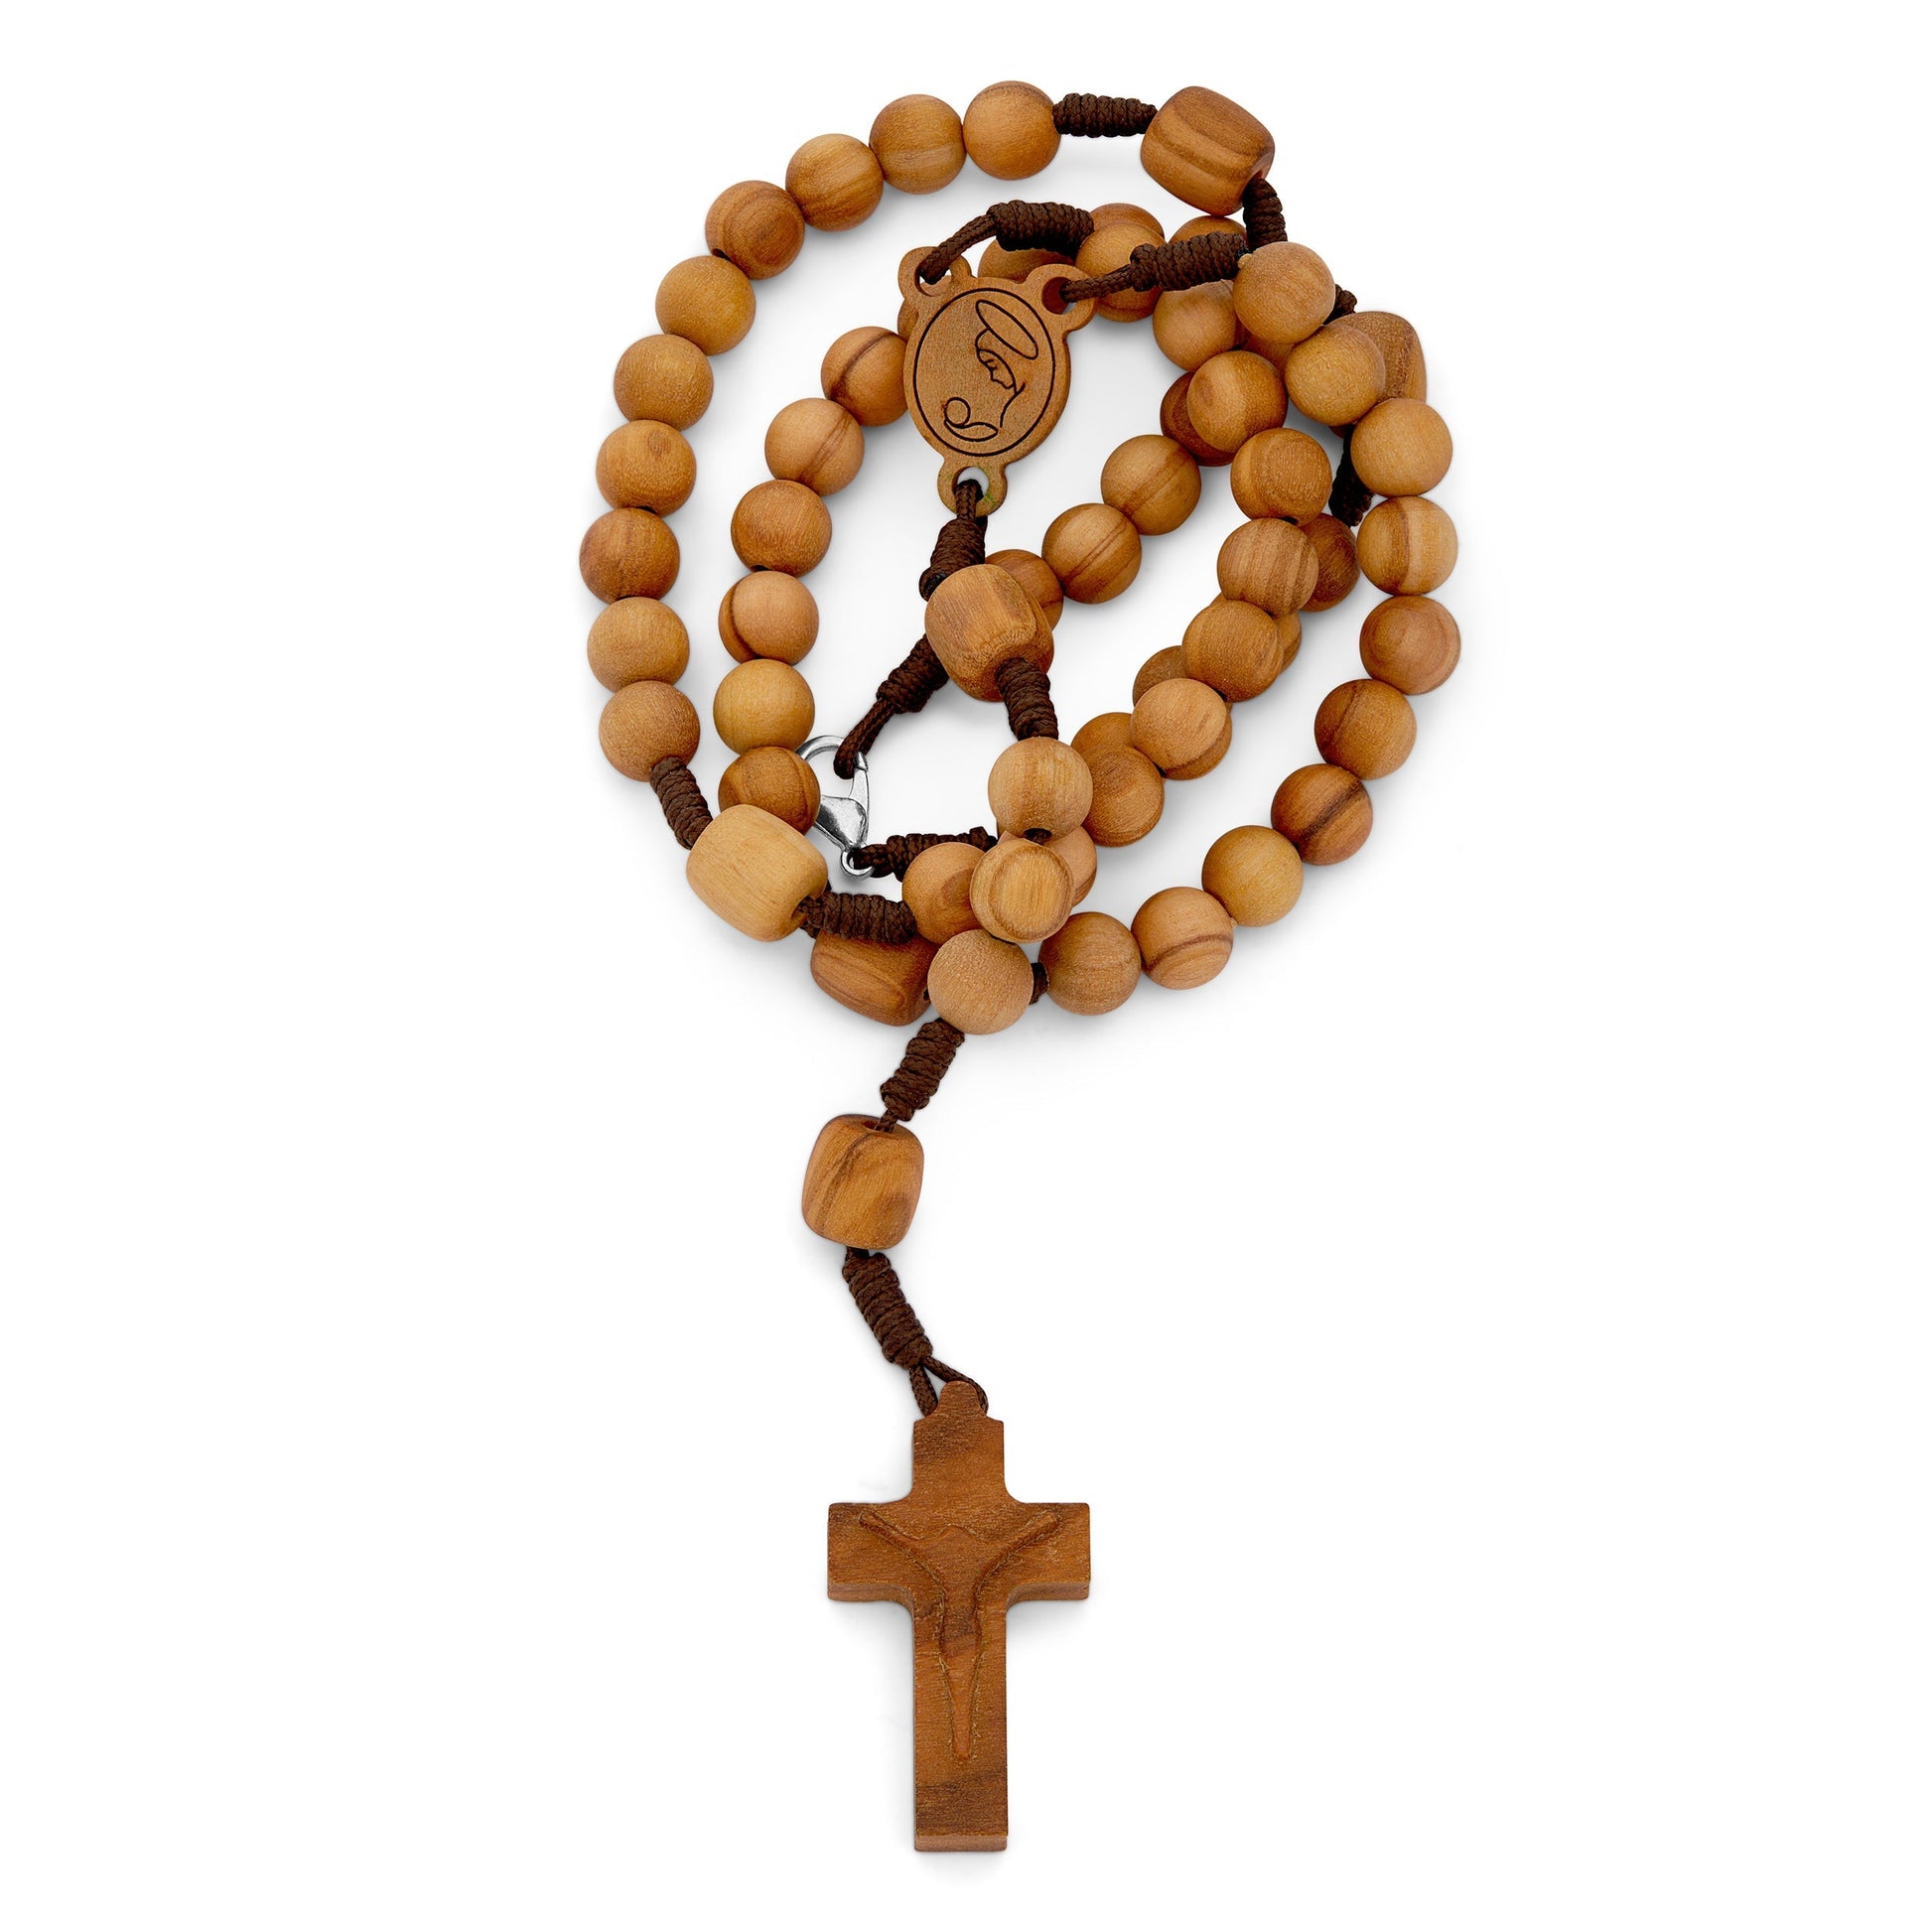 MONDO CATTOLICO Prayer Beads Rope Rosary Olive Wood Beads Mother Mary and Child